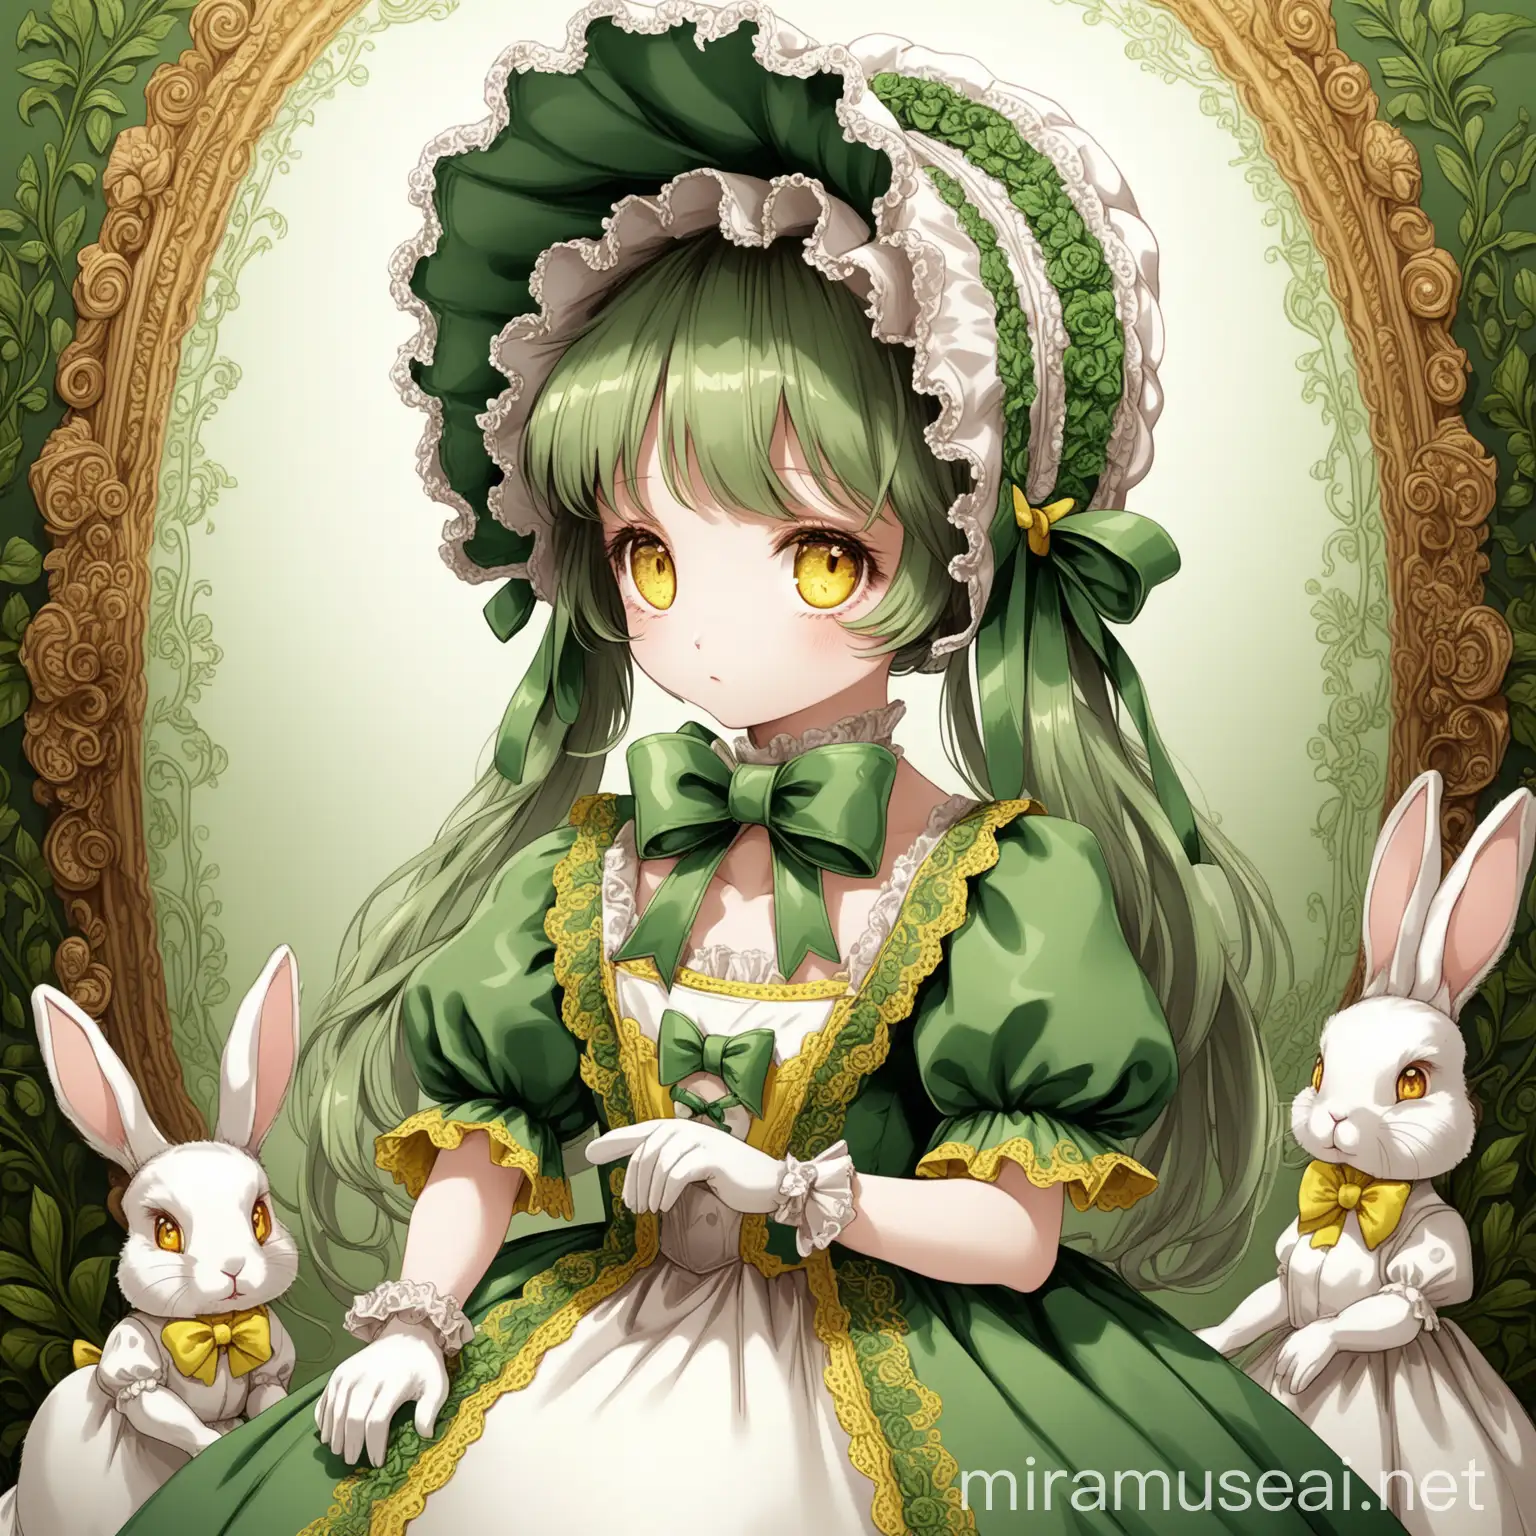 rabbit with yellow eyes, green fur, bow, bonnet, intricate gowns